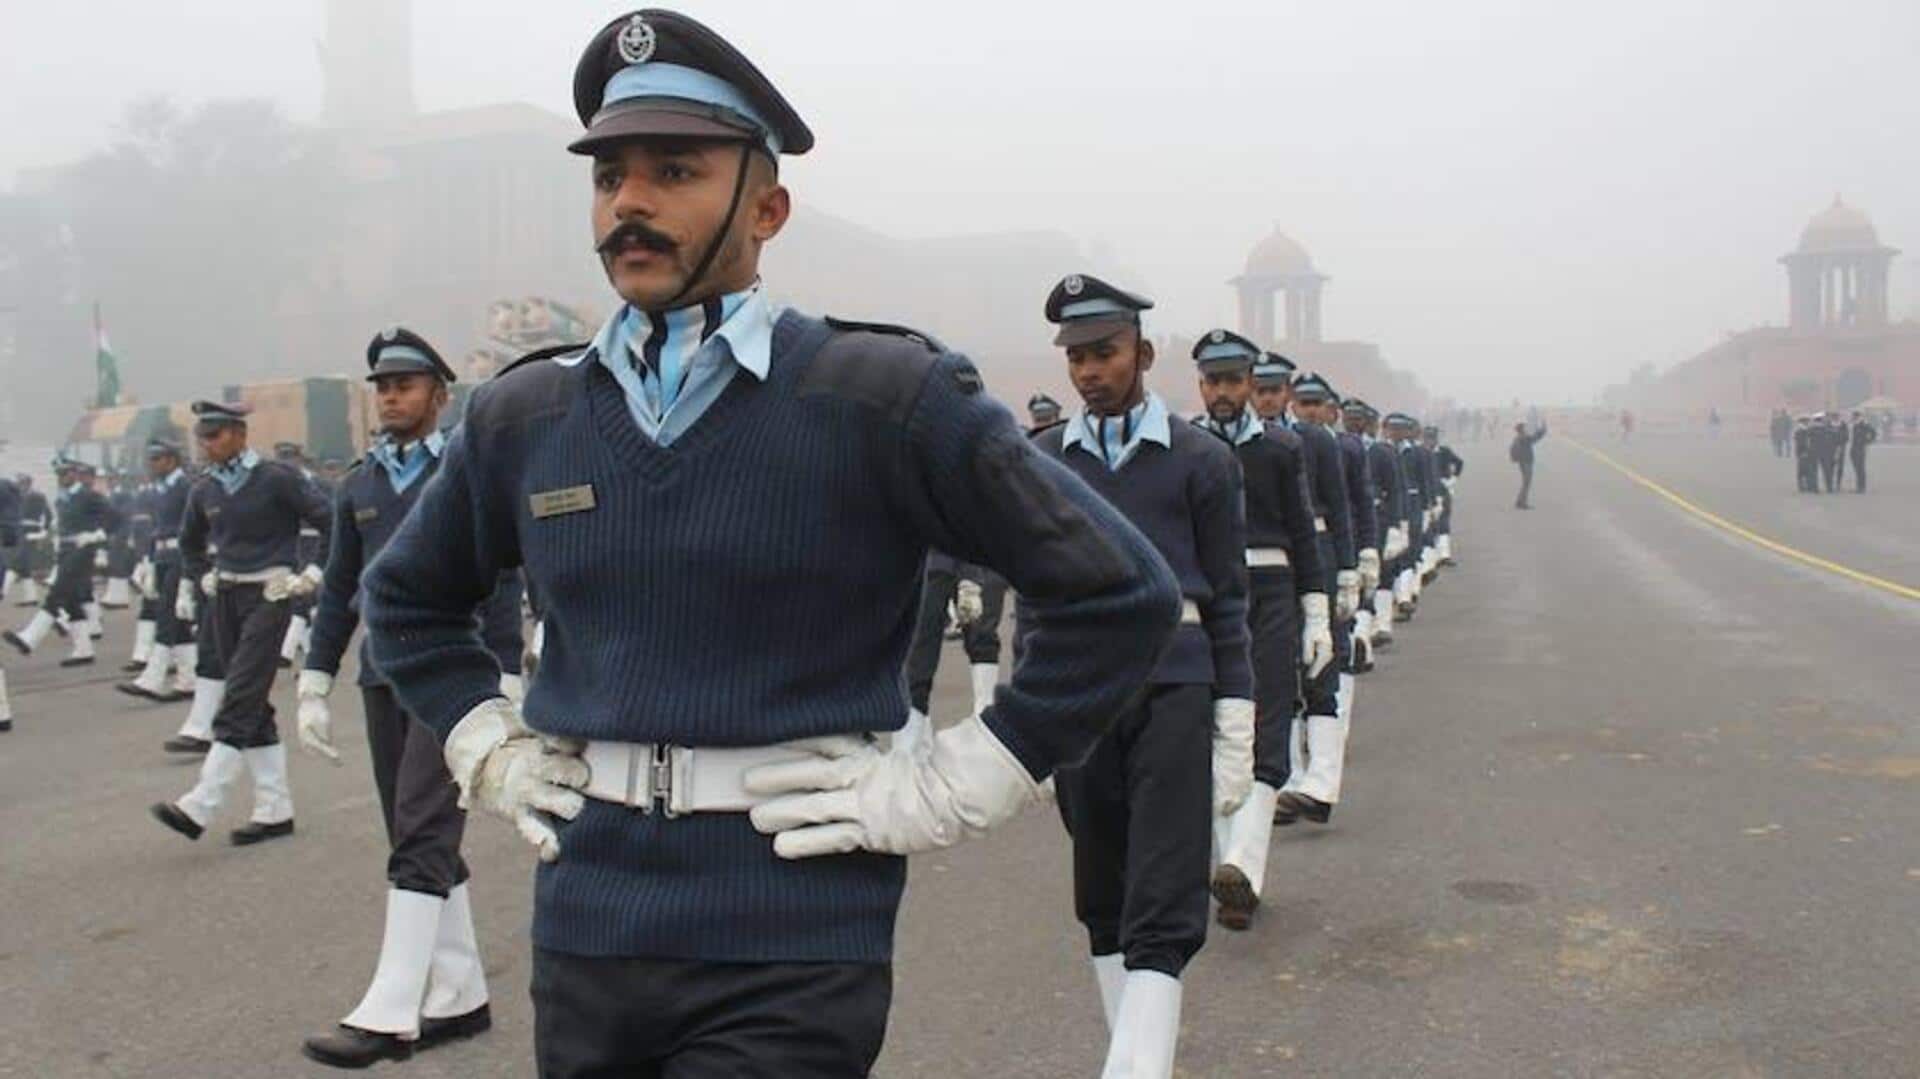 Armed forces recruitment exam in 13 regional languages, says MHA 